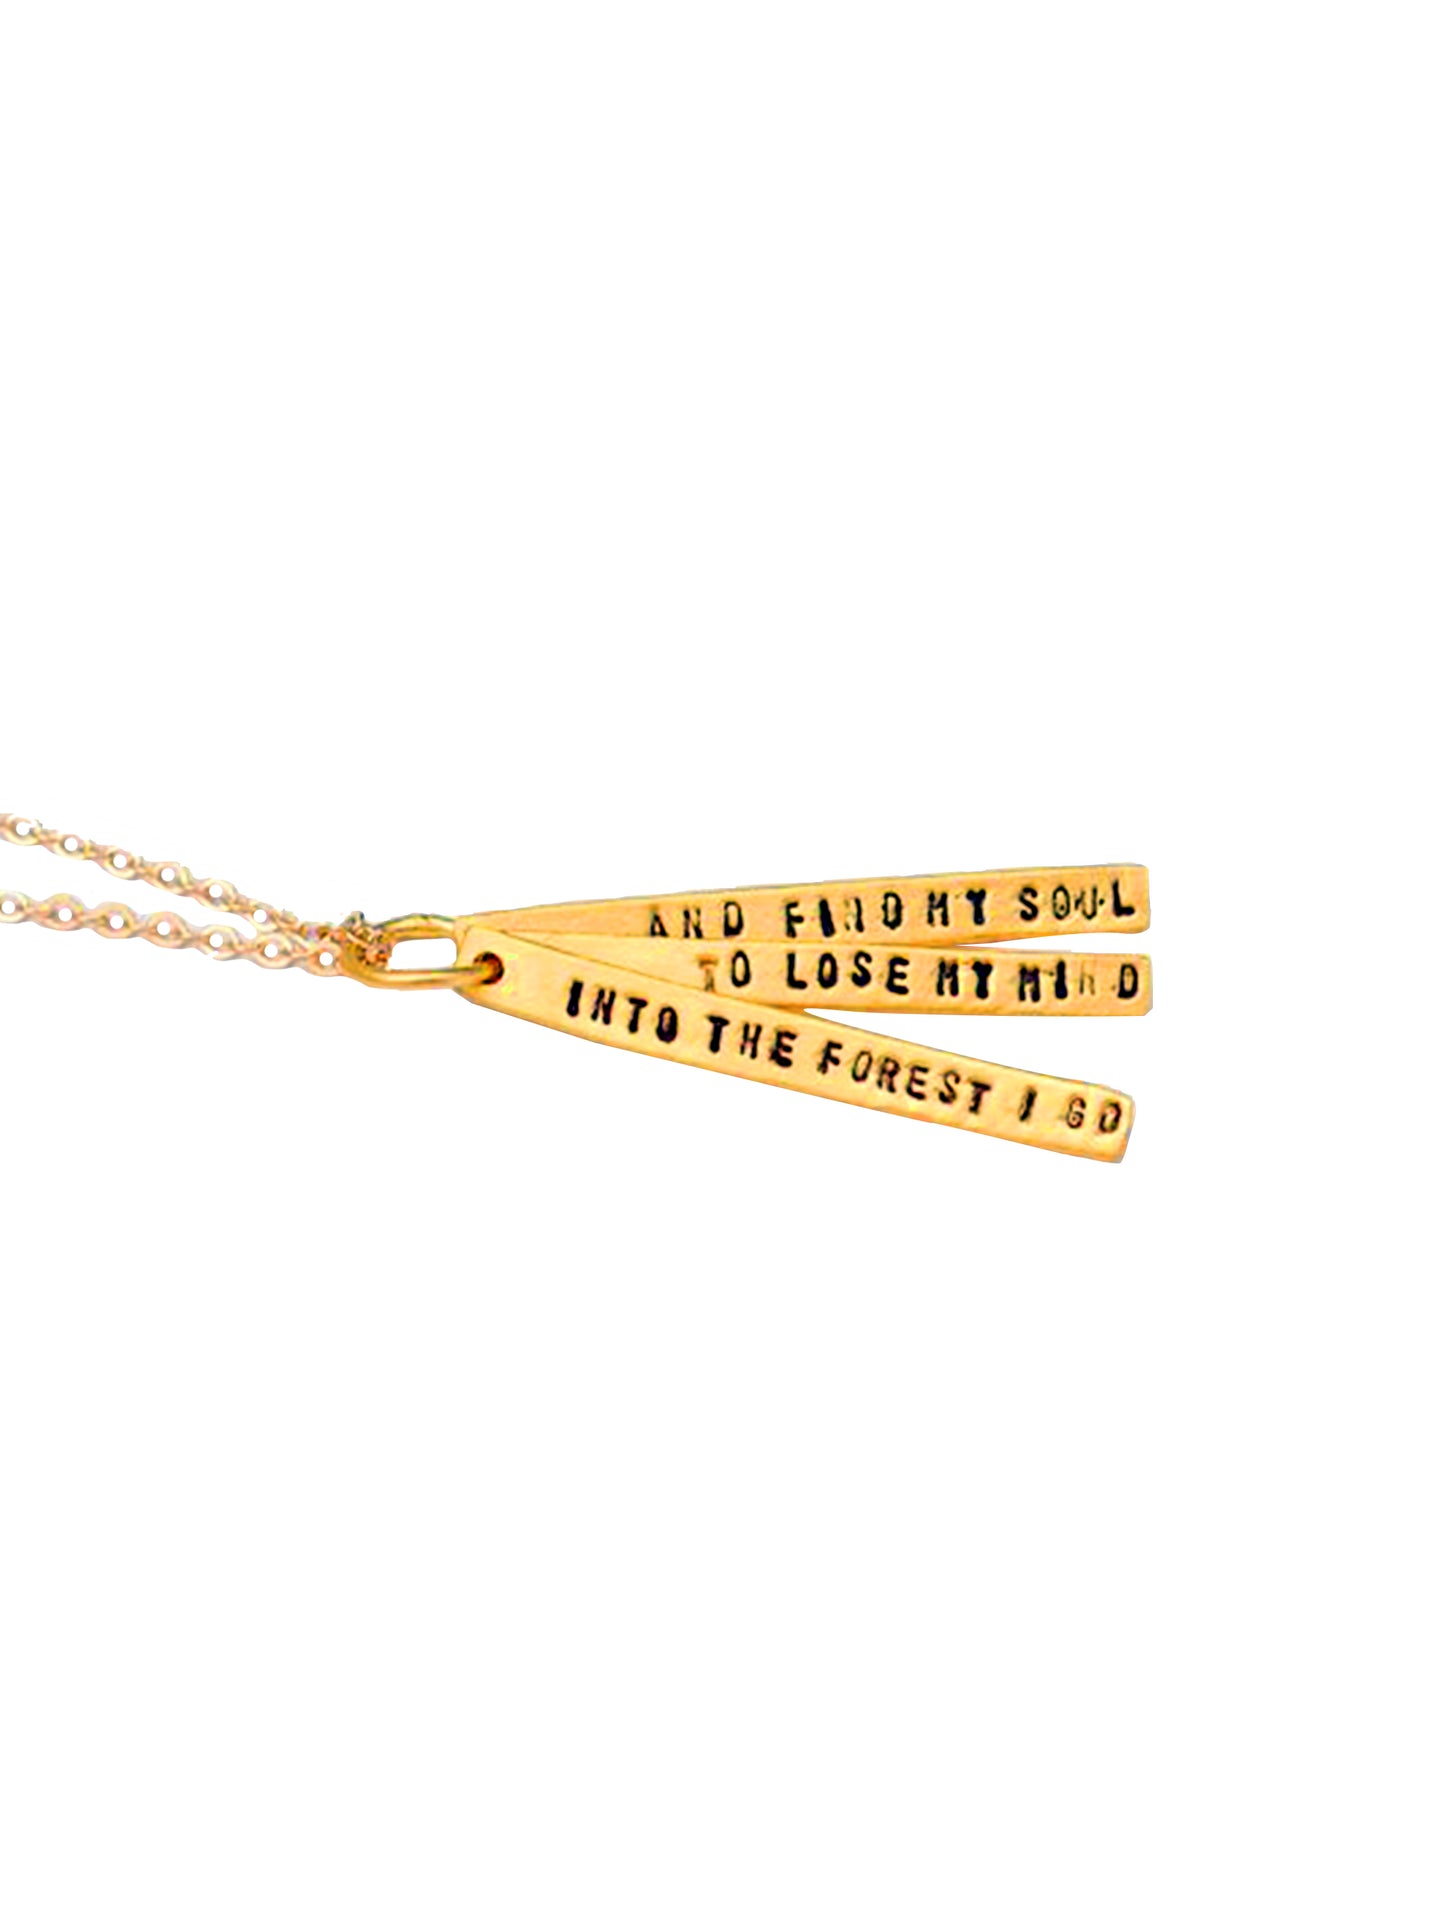 Chocolate & Steel Long-Bar Quote Necklace John Muir Into the Forest I Go Gold Weston Table